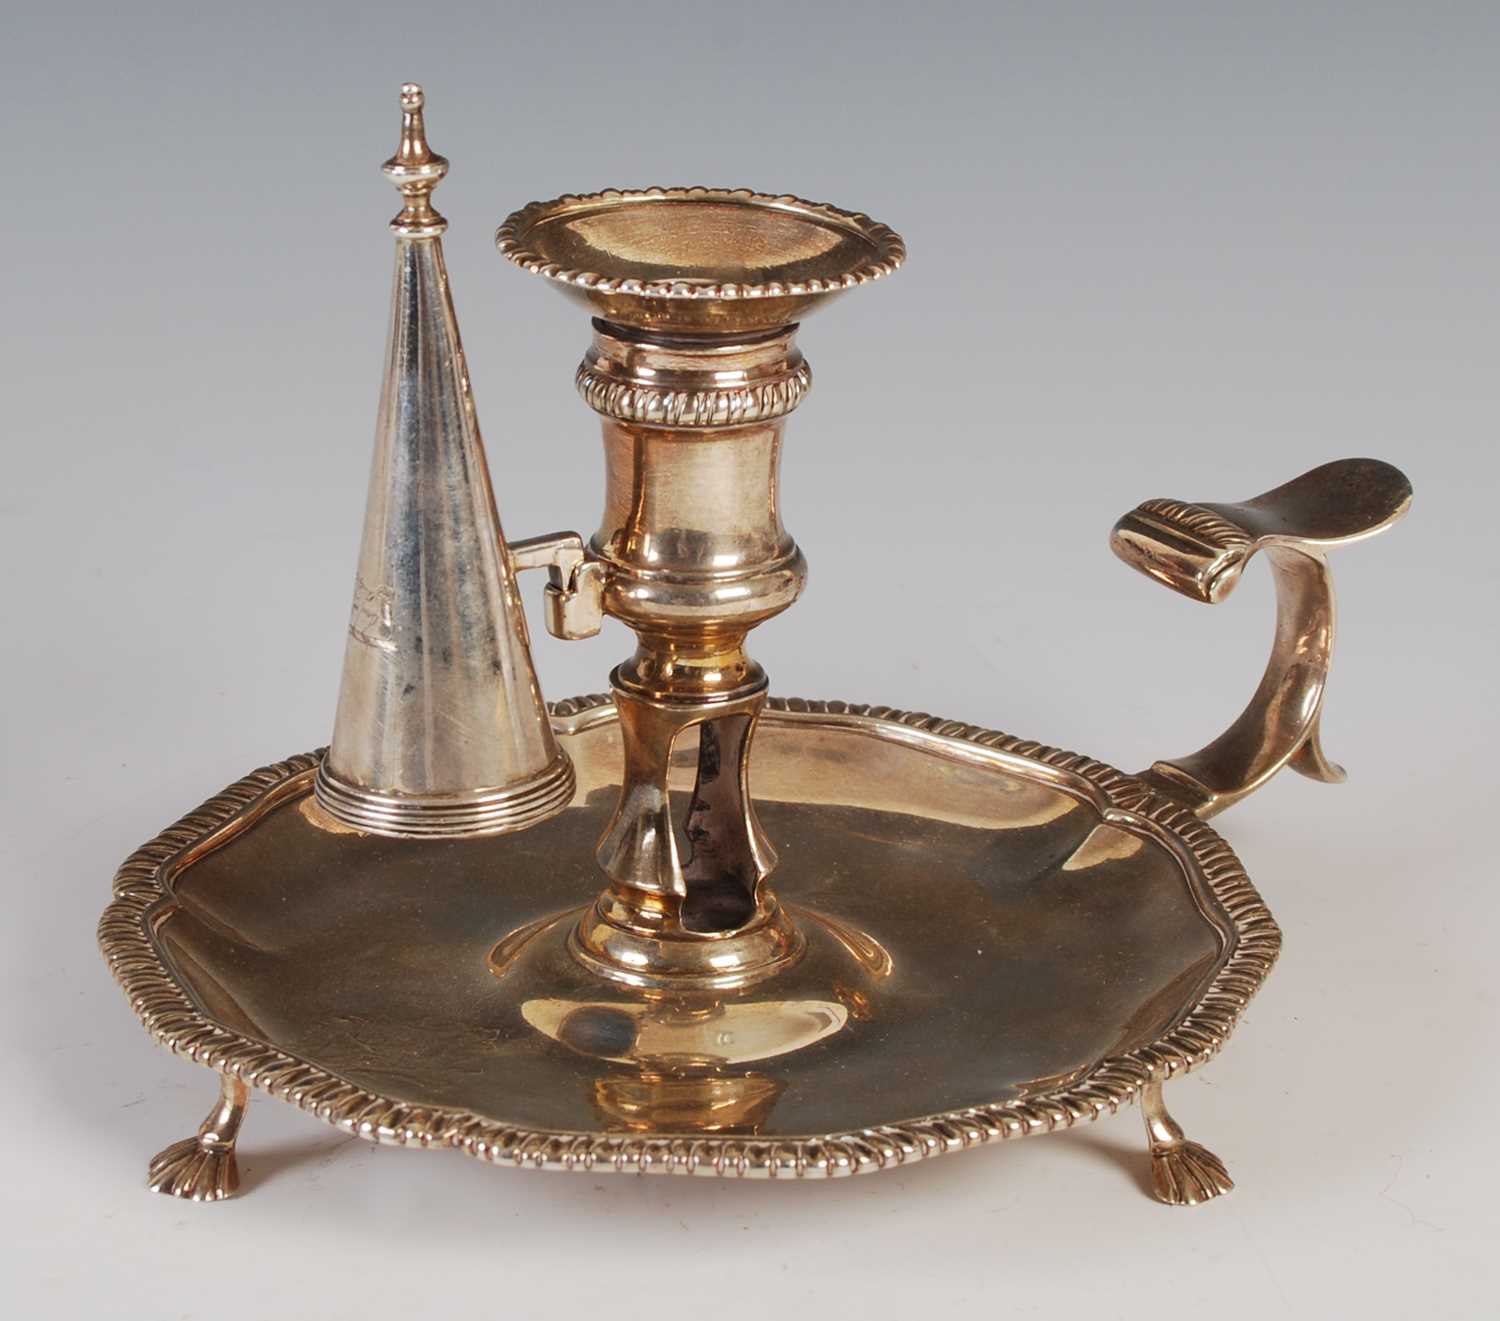 A George III silver chamber candlestick, London 1767, makers mark 'E.C' for Ebenezer Coker, engraved